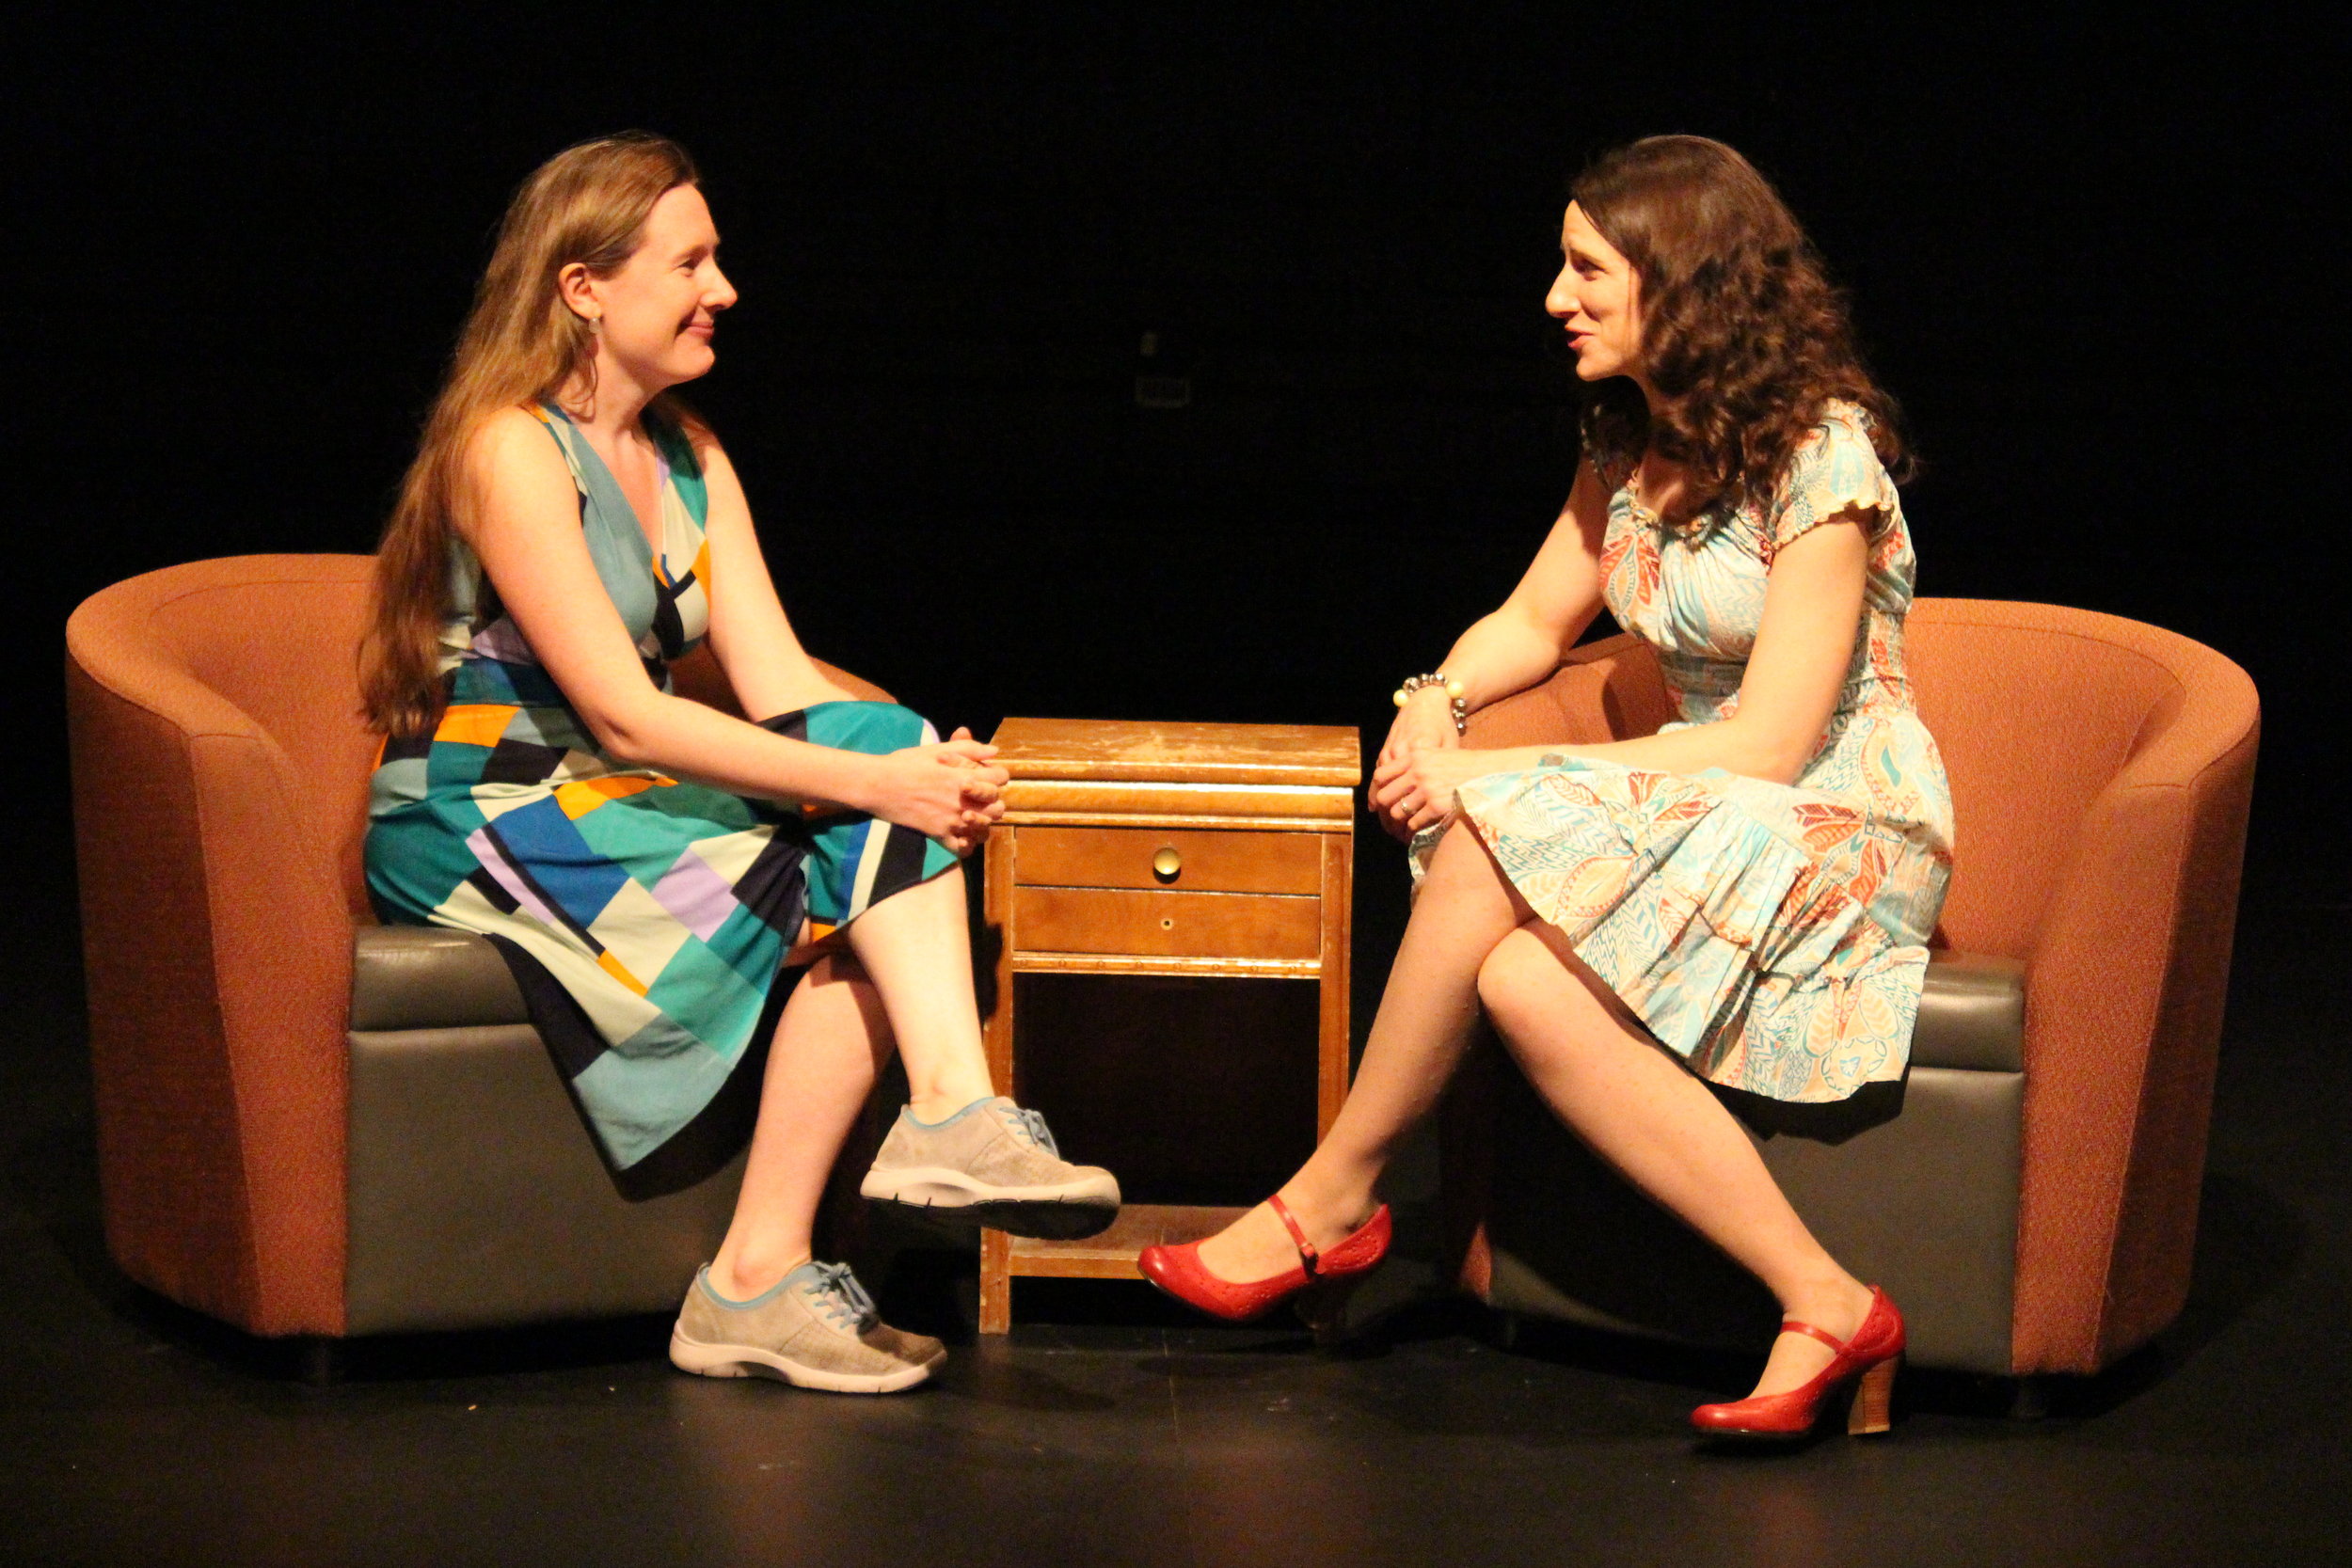  Julie Tepperman interviewing Playwright Sarah Ruhl, live onstage at Tarragon Theatre (June 22, 2013) 